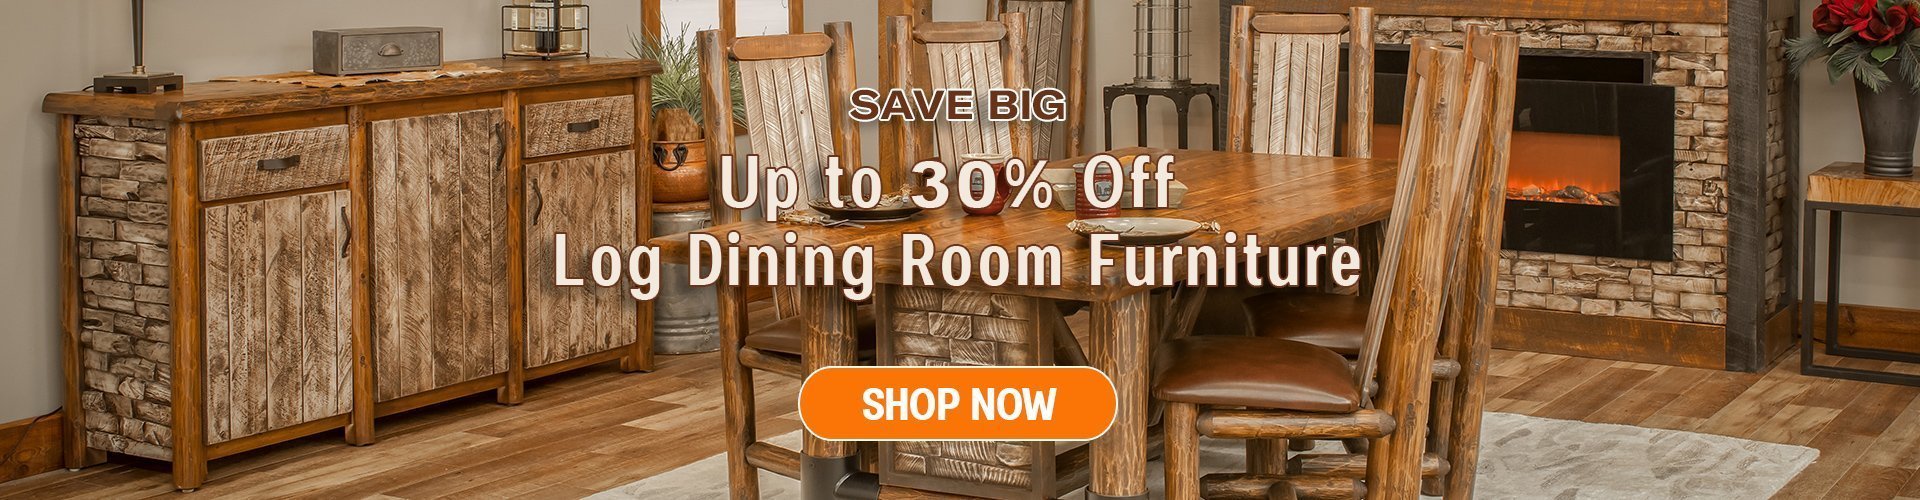 Rustic Log Furniture For Cabin Lodge, Log Cabin Dining Room Chairs